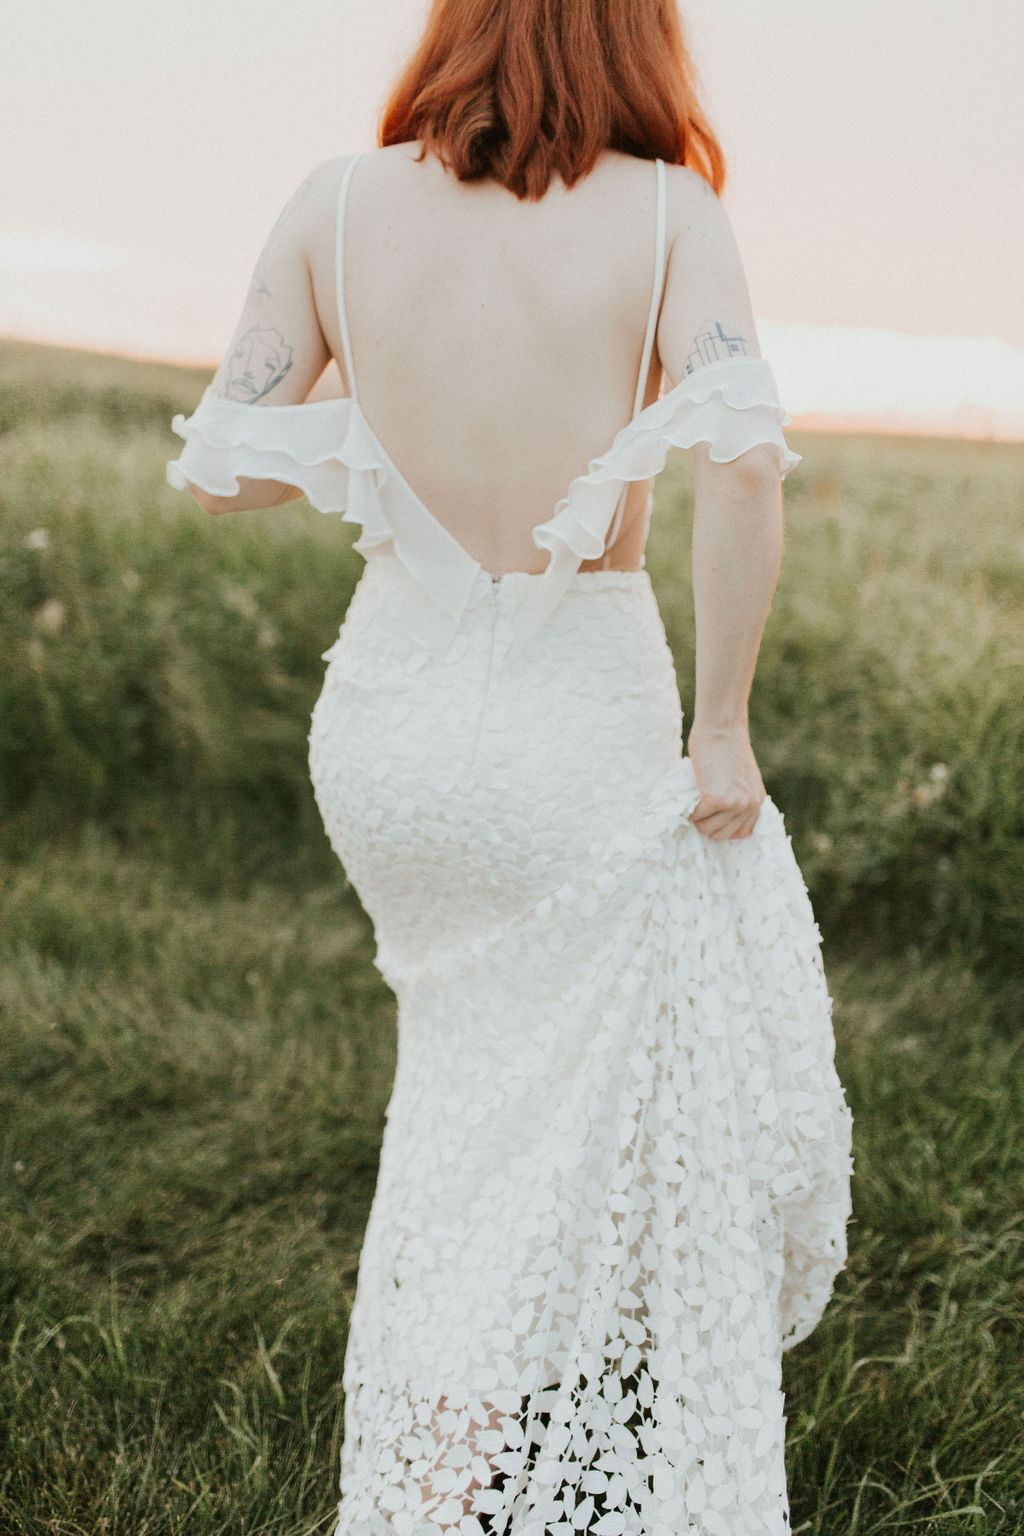 Dreamy wedding dress with off the shoulder ruffled sleeves, delicate lace details and a stunning back